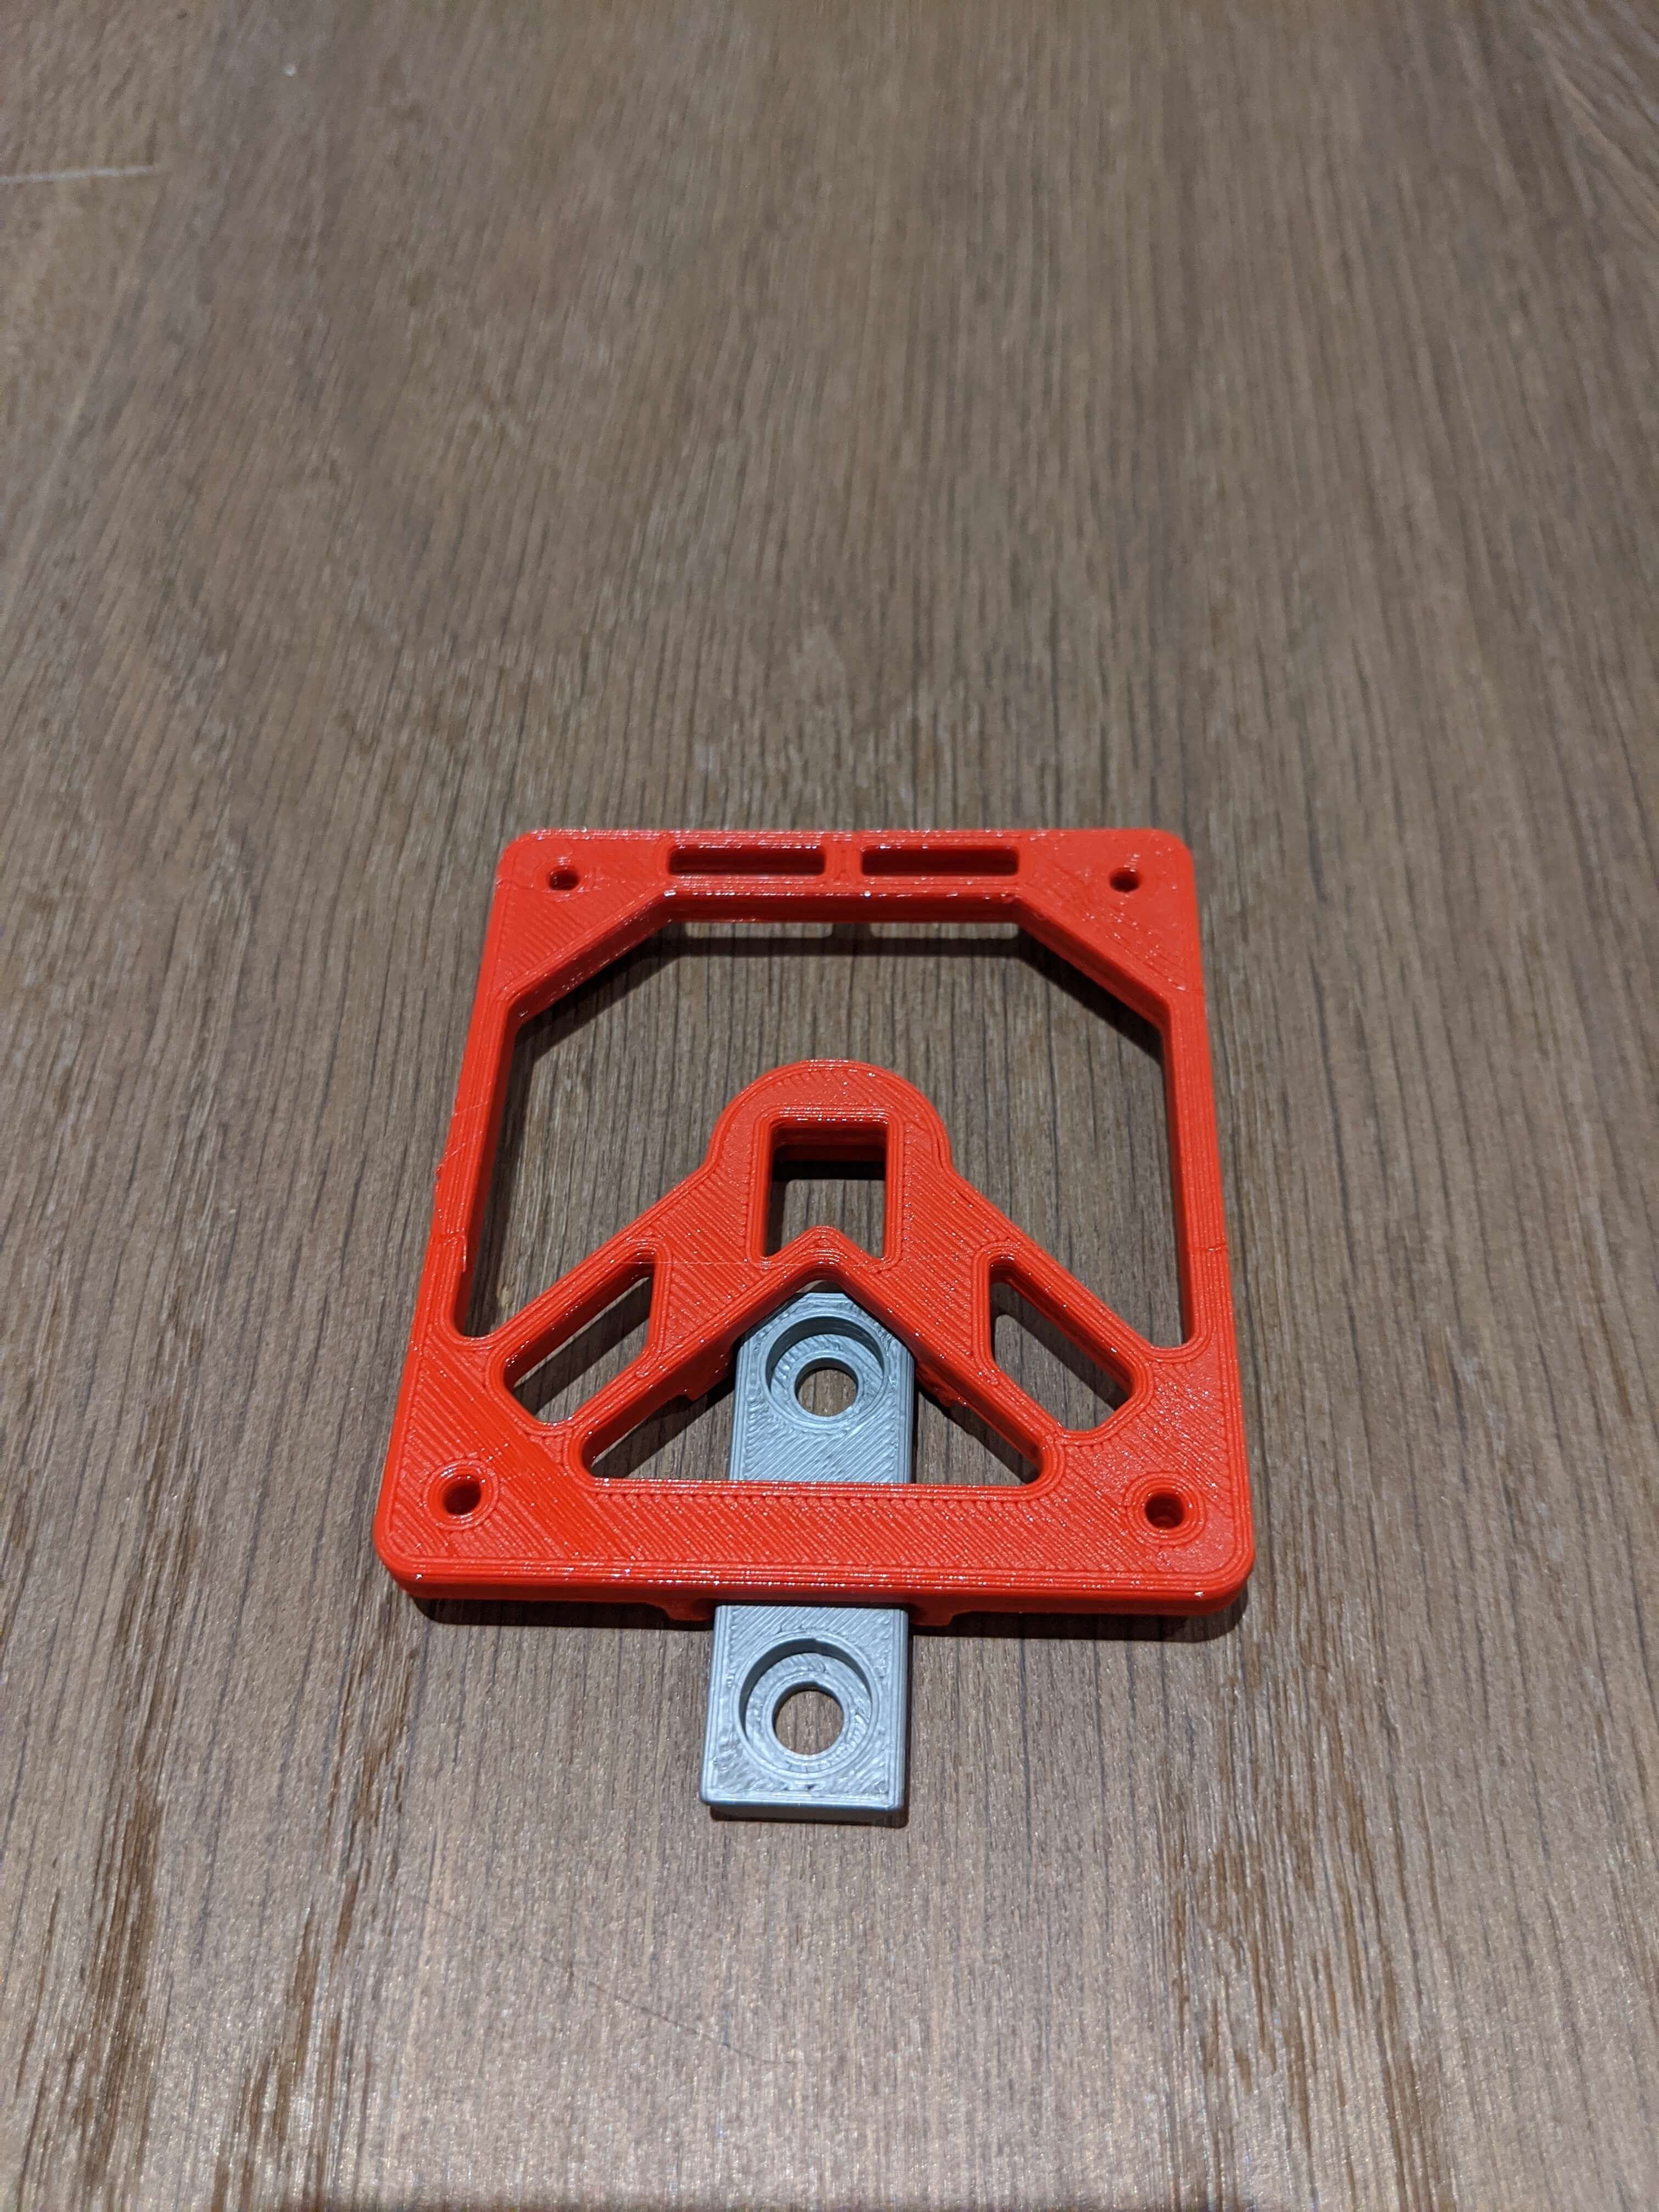 Raspberry Pi Wall Mount 3D printed red